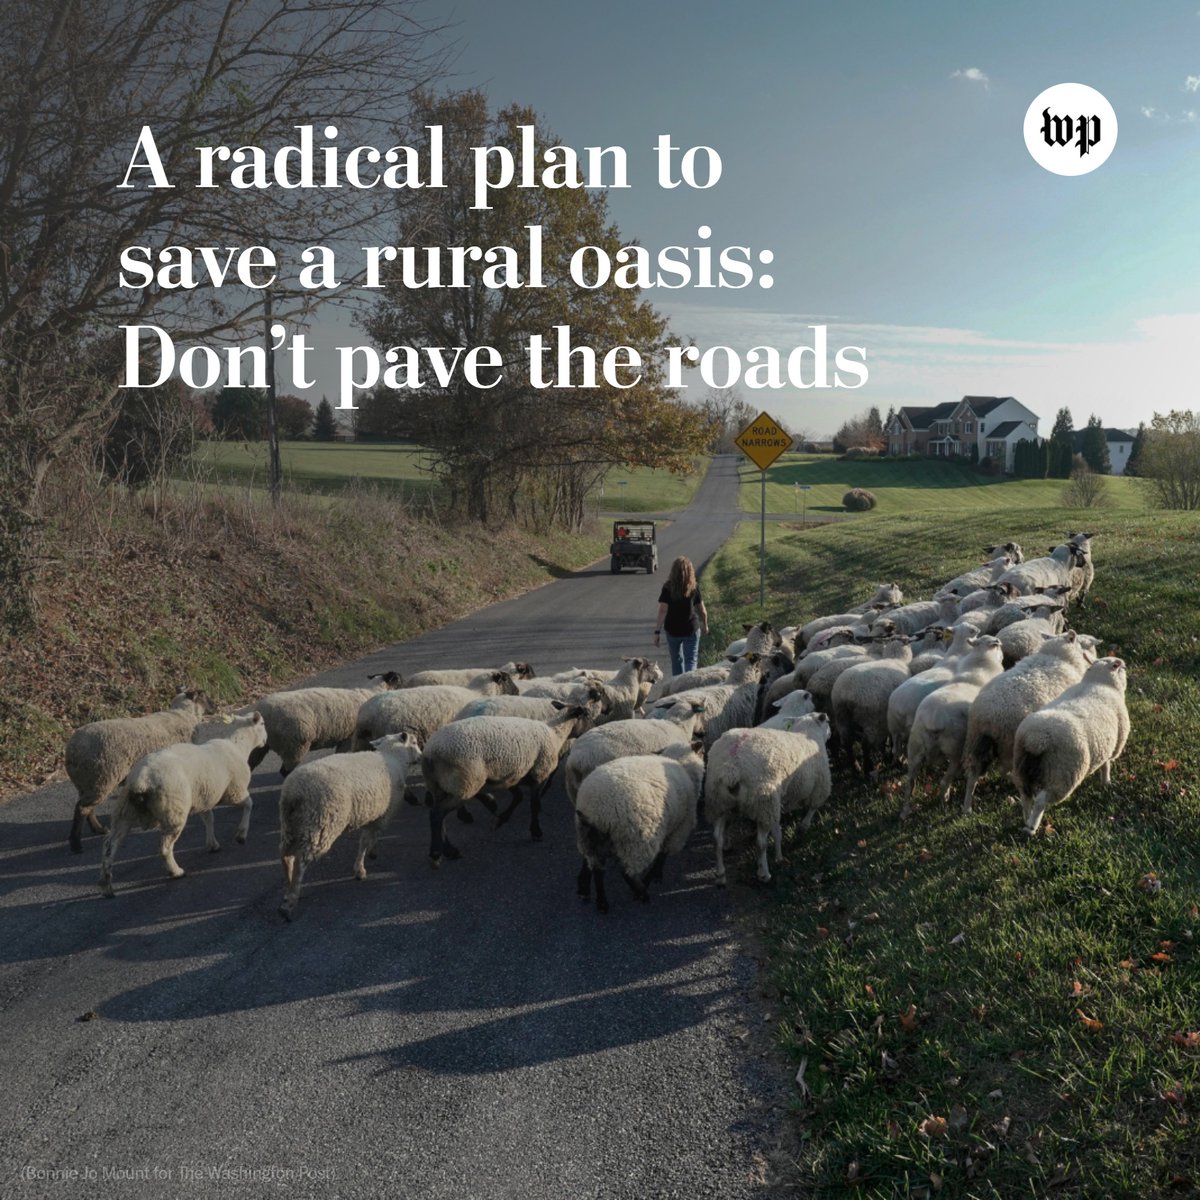 Loudoun County, Va., has become the latest focus of an unlikely movement to preserve a slice of landscape often thought of as waiting its turn for improvement: unpaved roads. wapo.st/3HPLtSP